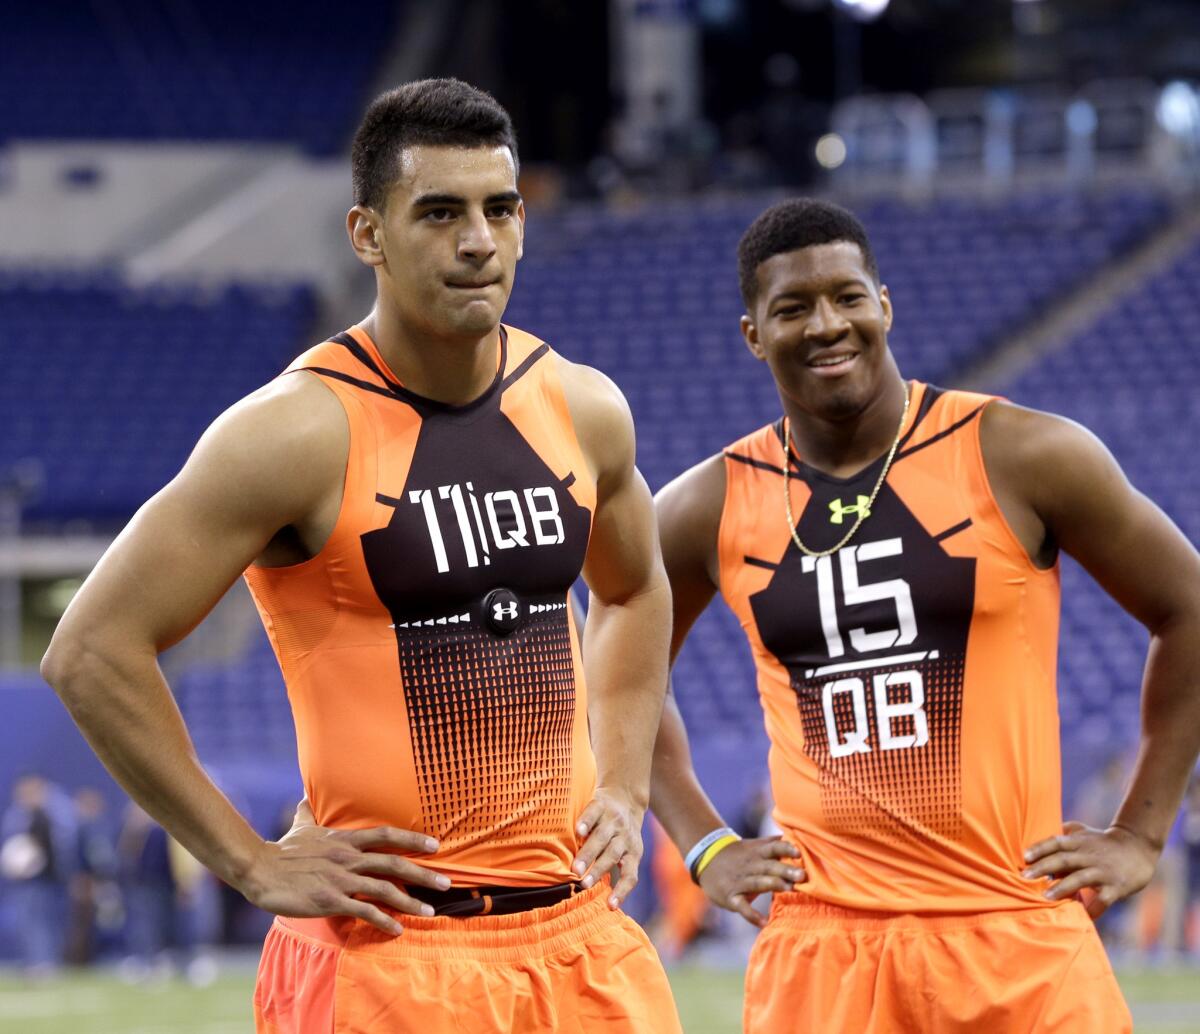 Oregon quarterback Marcus Mariota and Florida State quarterback Jameis Winston wait to run a drill at the NFL scouting combine on Feb. 21.